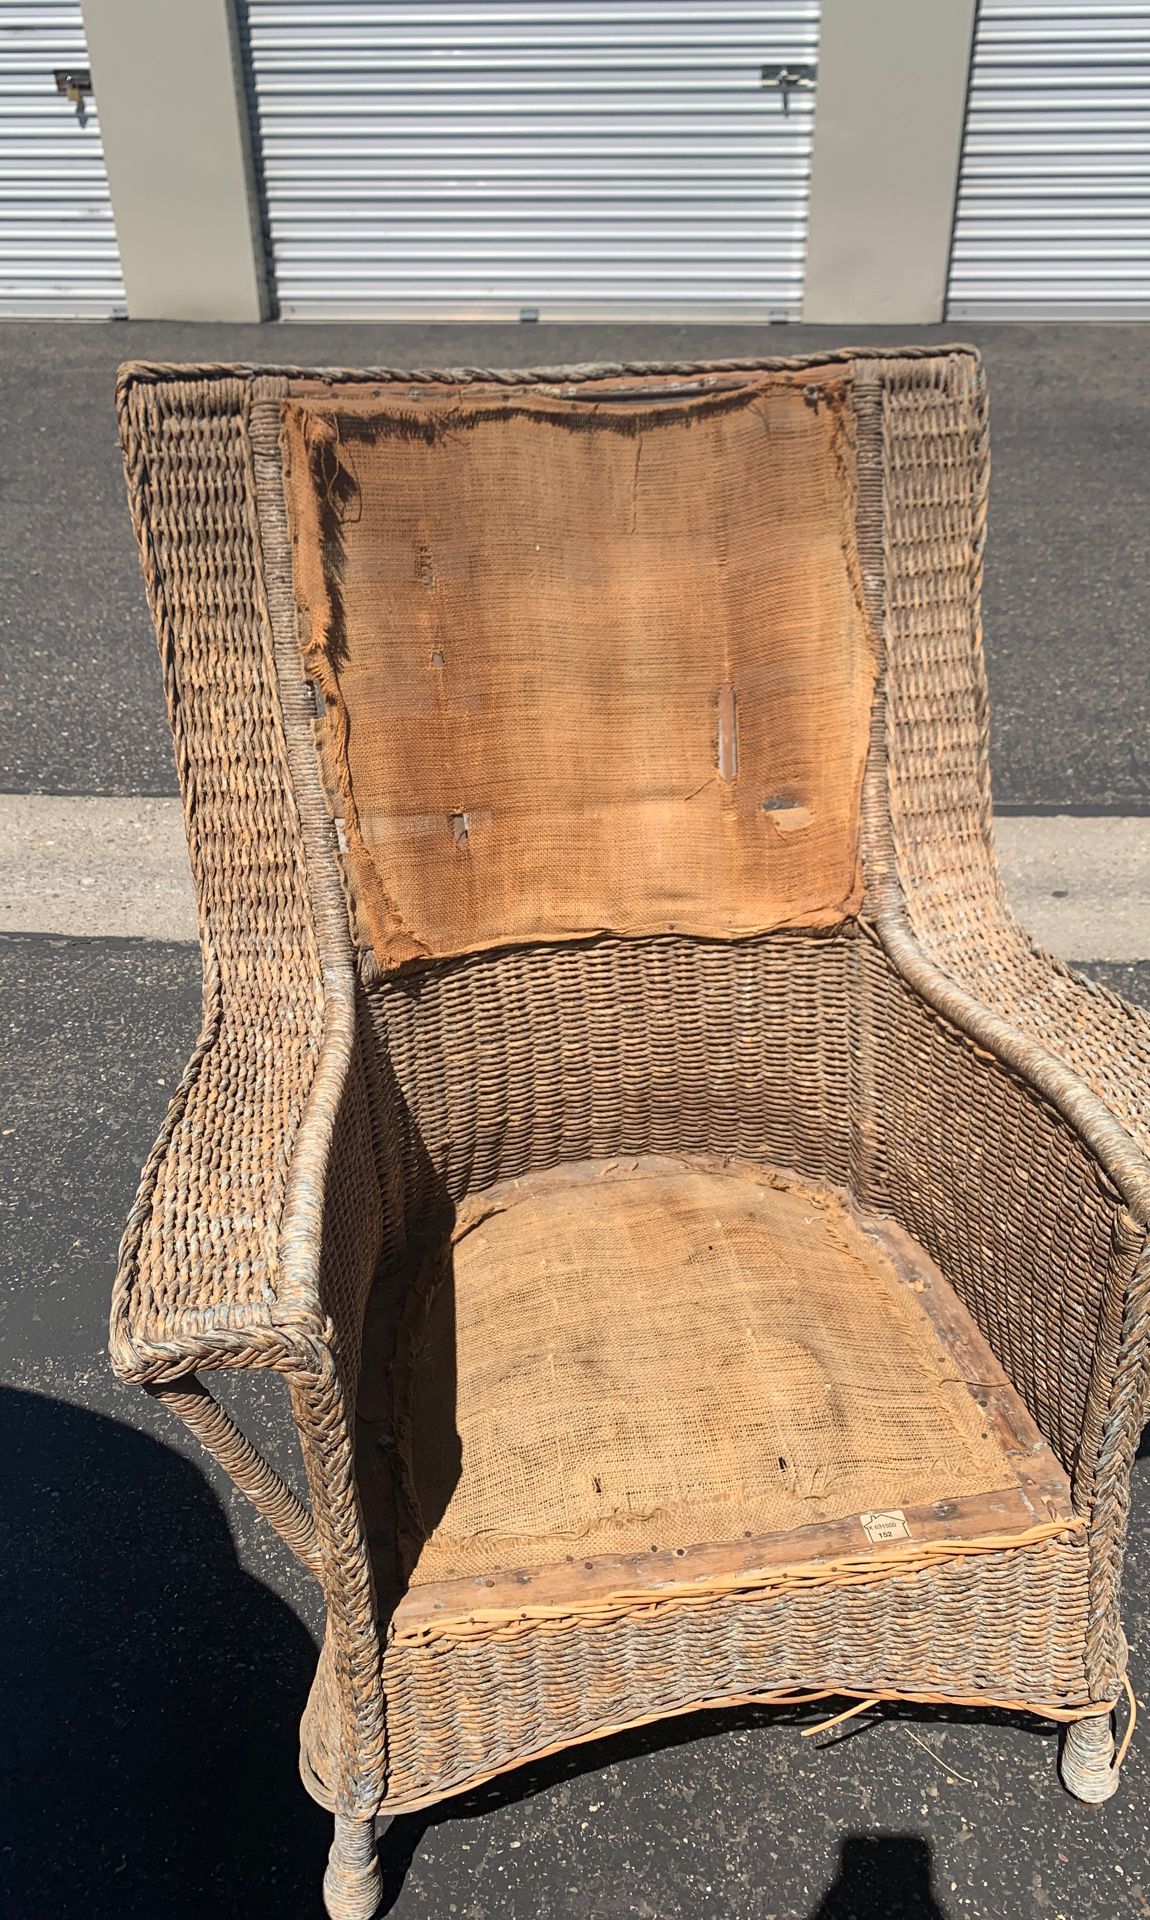 Old Wicker chair